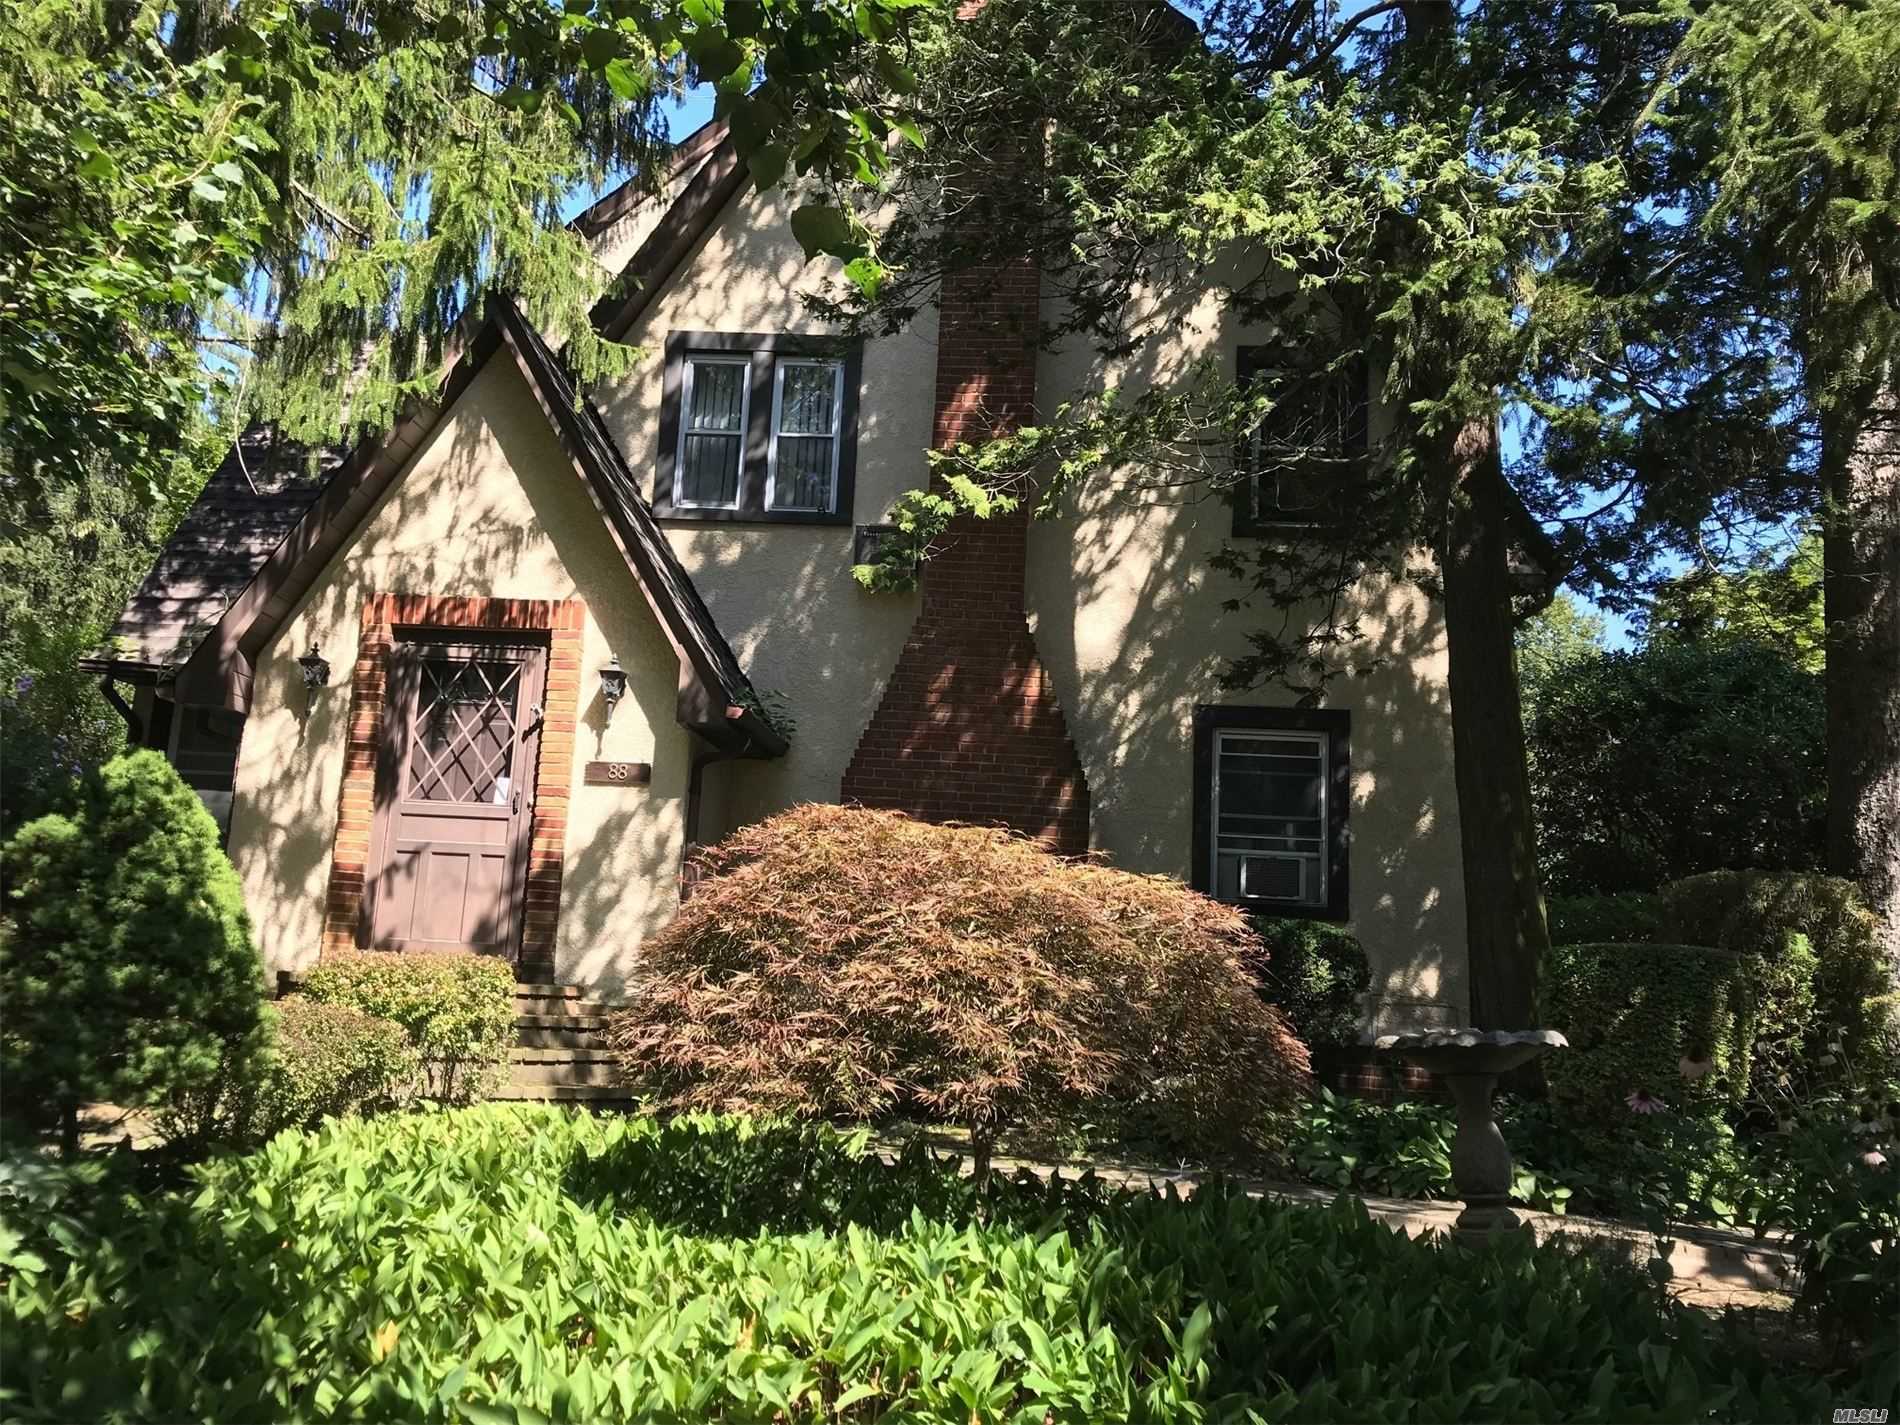 Charm & grace enhance the beautiful bones of this 3 BR Tudor. Large LR w/fireplace, spacious Eat-in-Kitchen and Formal Dining Room. Master Suite with dressing area and lots of closet space. Landscaped grounds. North Shore Schools, beach privileges. Don't miss this one!